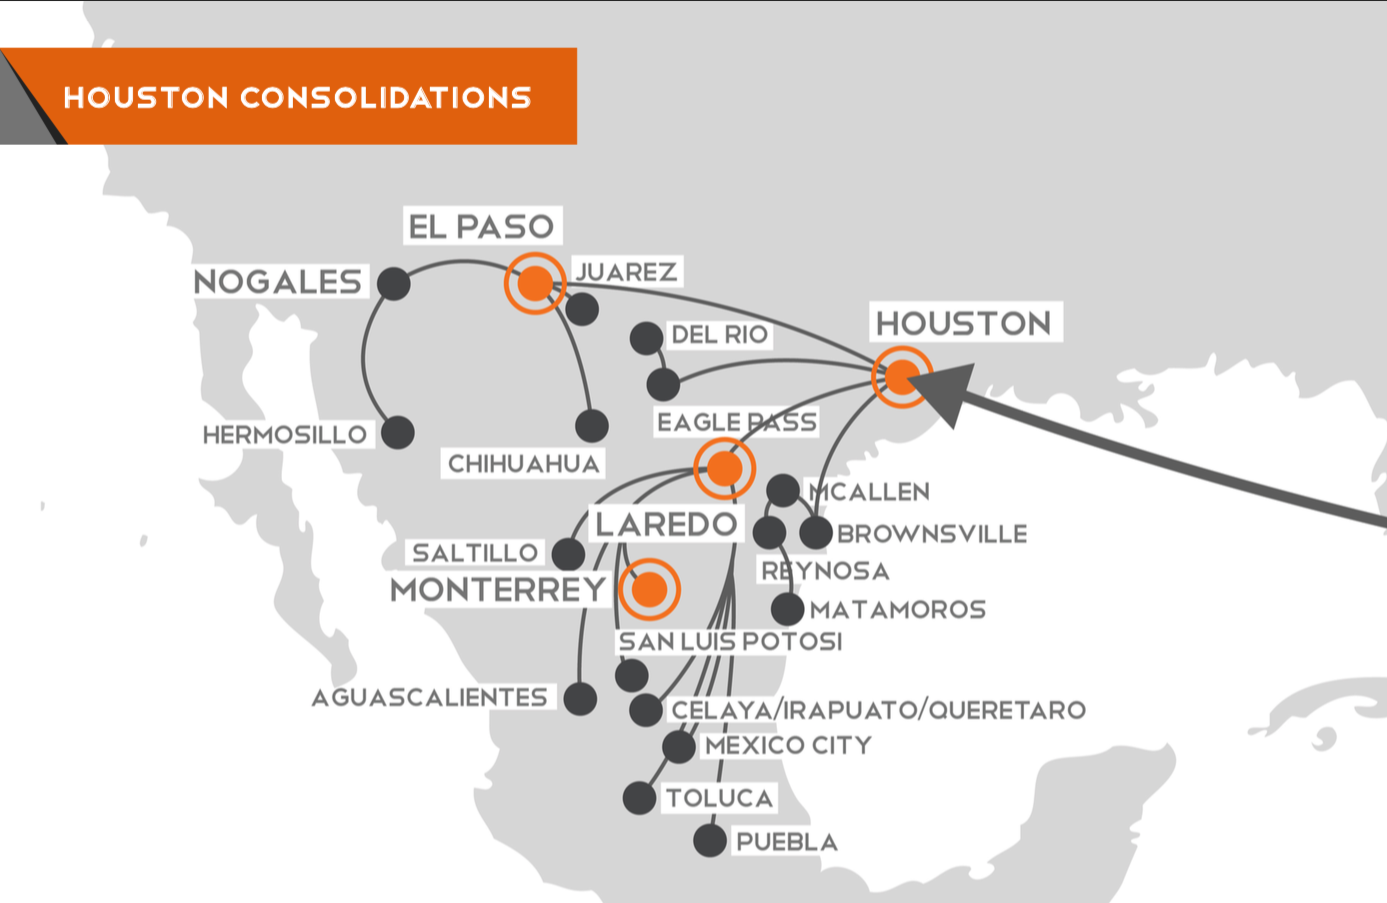 A map illustrates some of TOC Logistics' Houston consolidation routes.